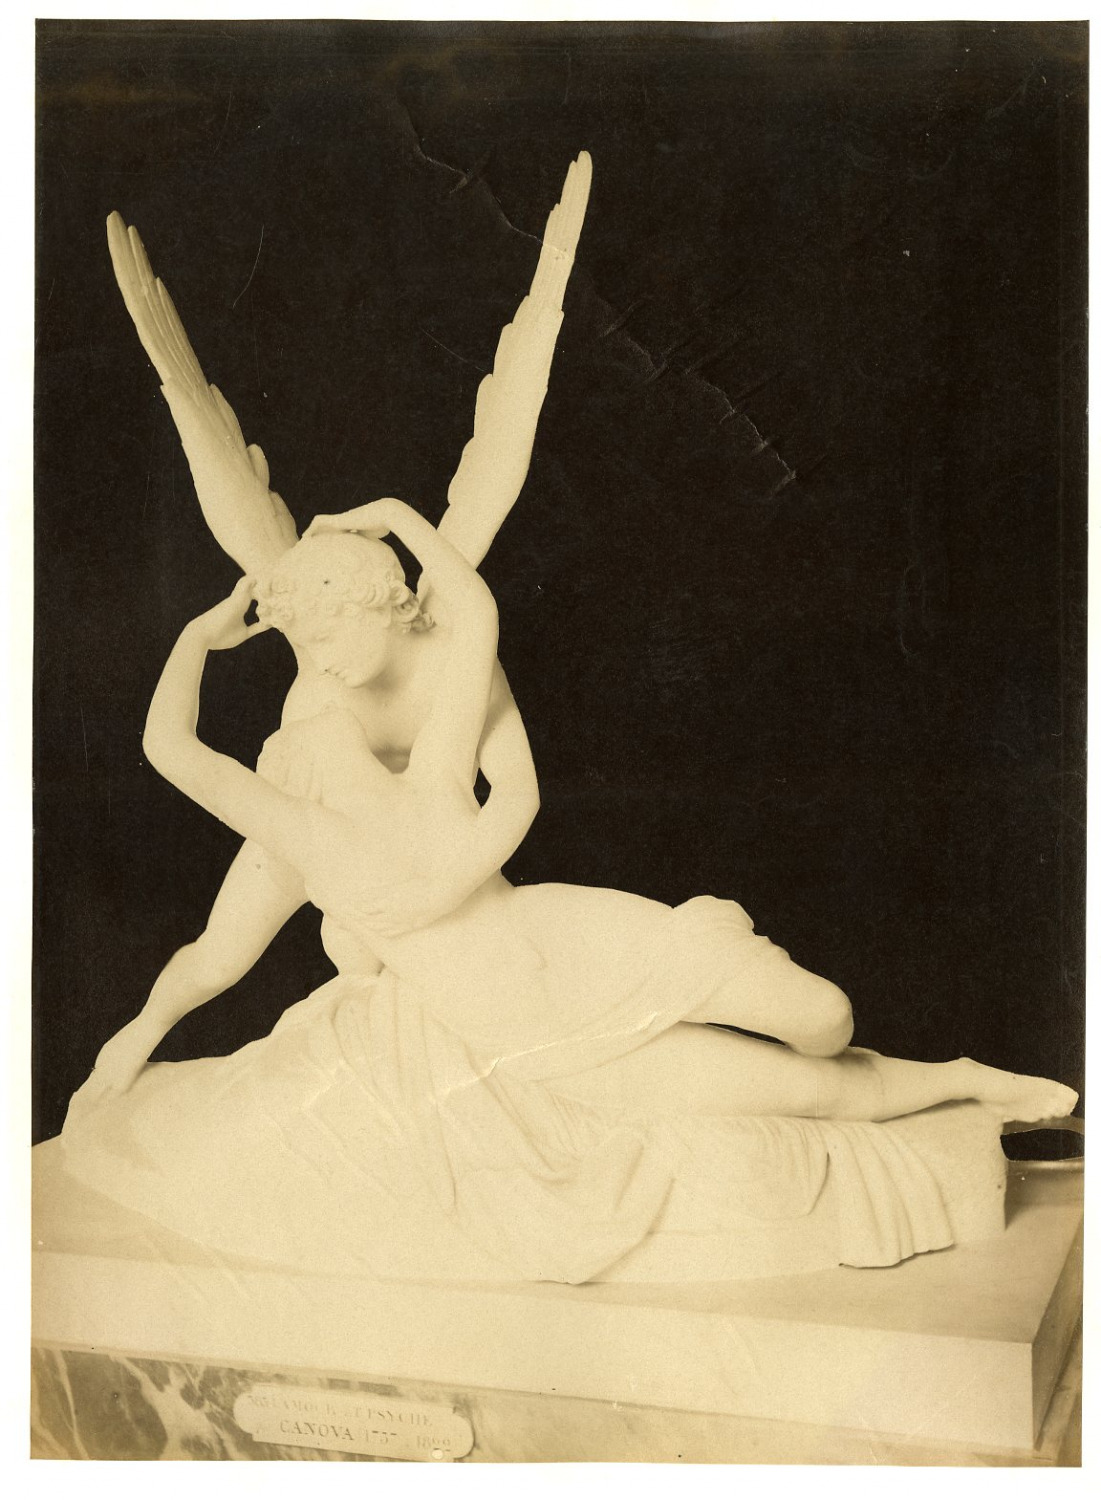 Italy, Psyche Revived by Cupid's Kiss Vintage Albumen Print.  Albumin Print